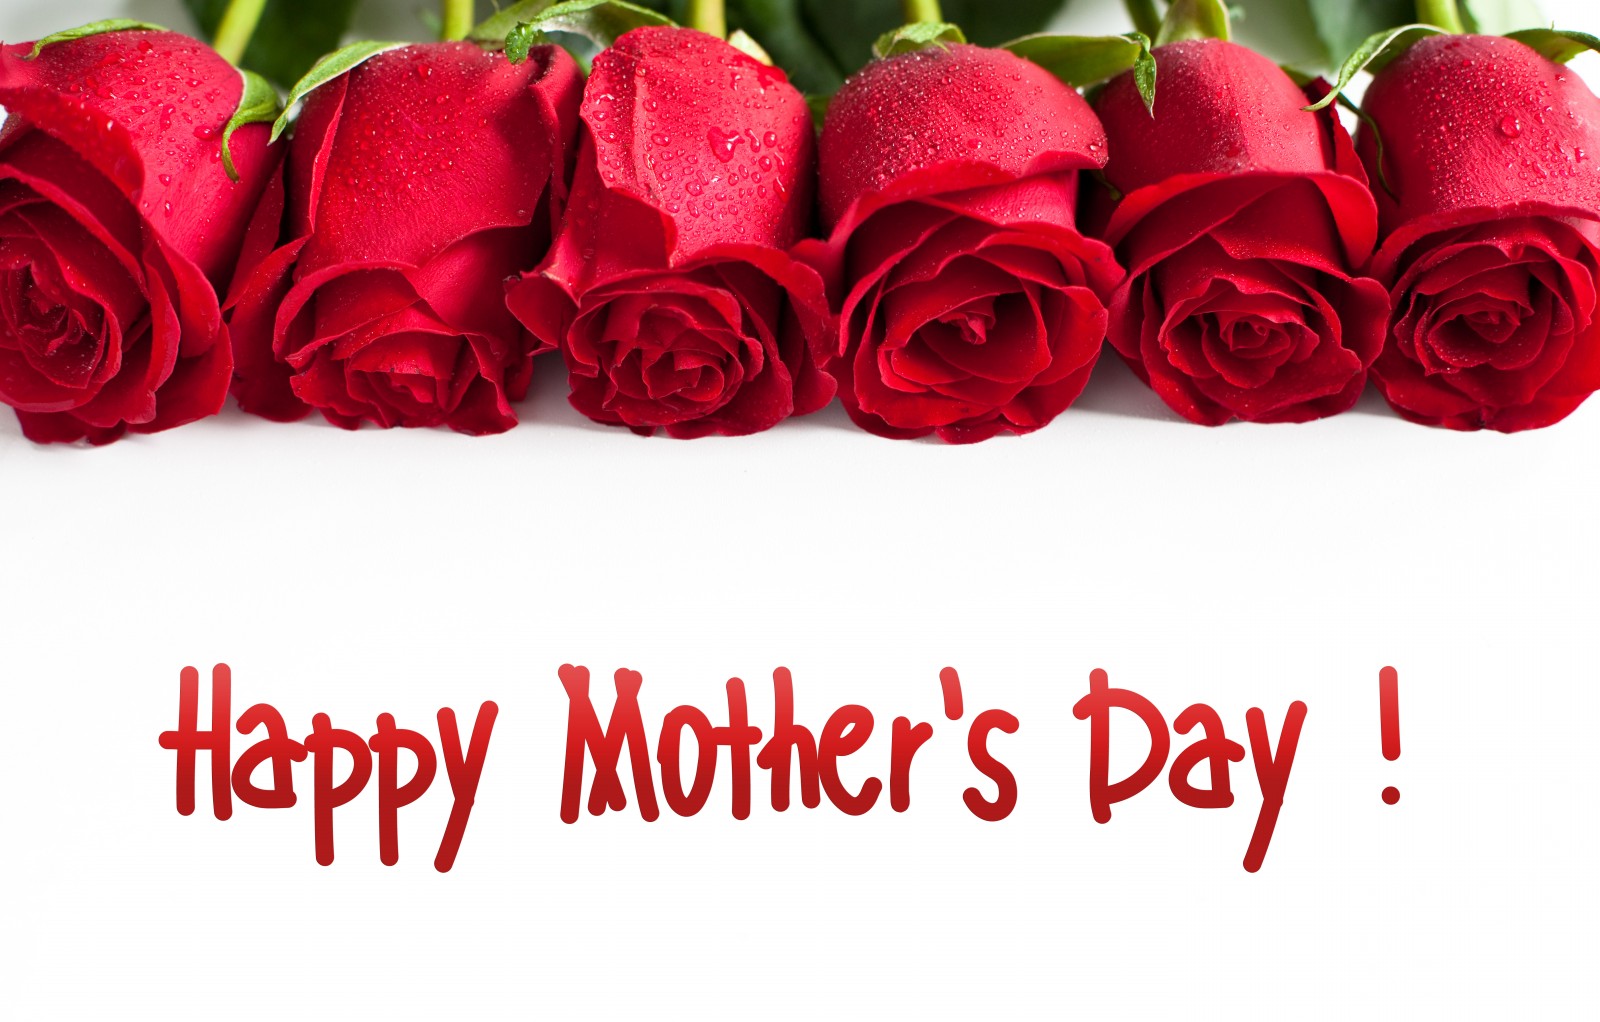 Happy Mothers Day Image For Whatsapp Wish